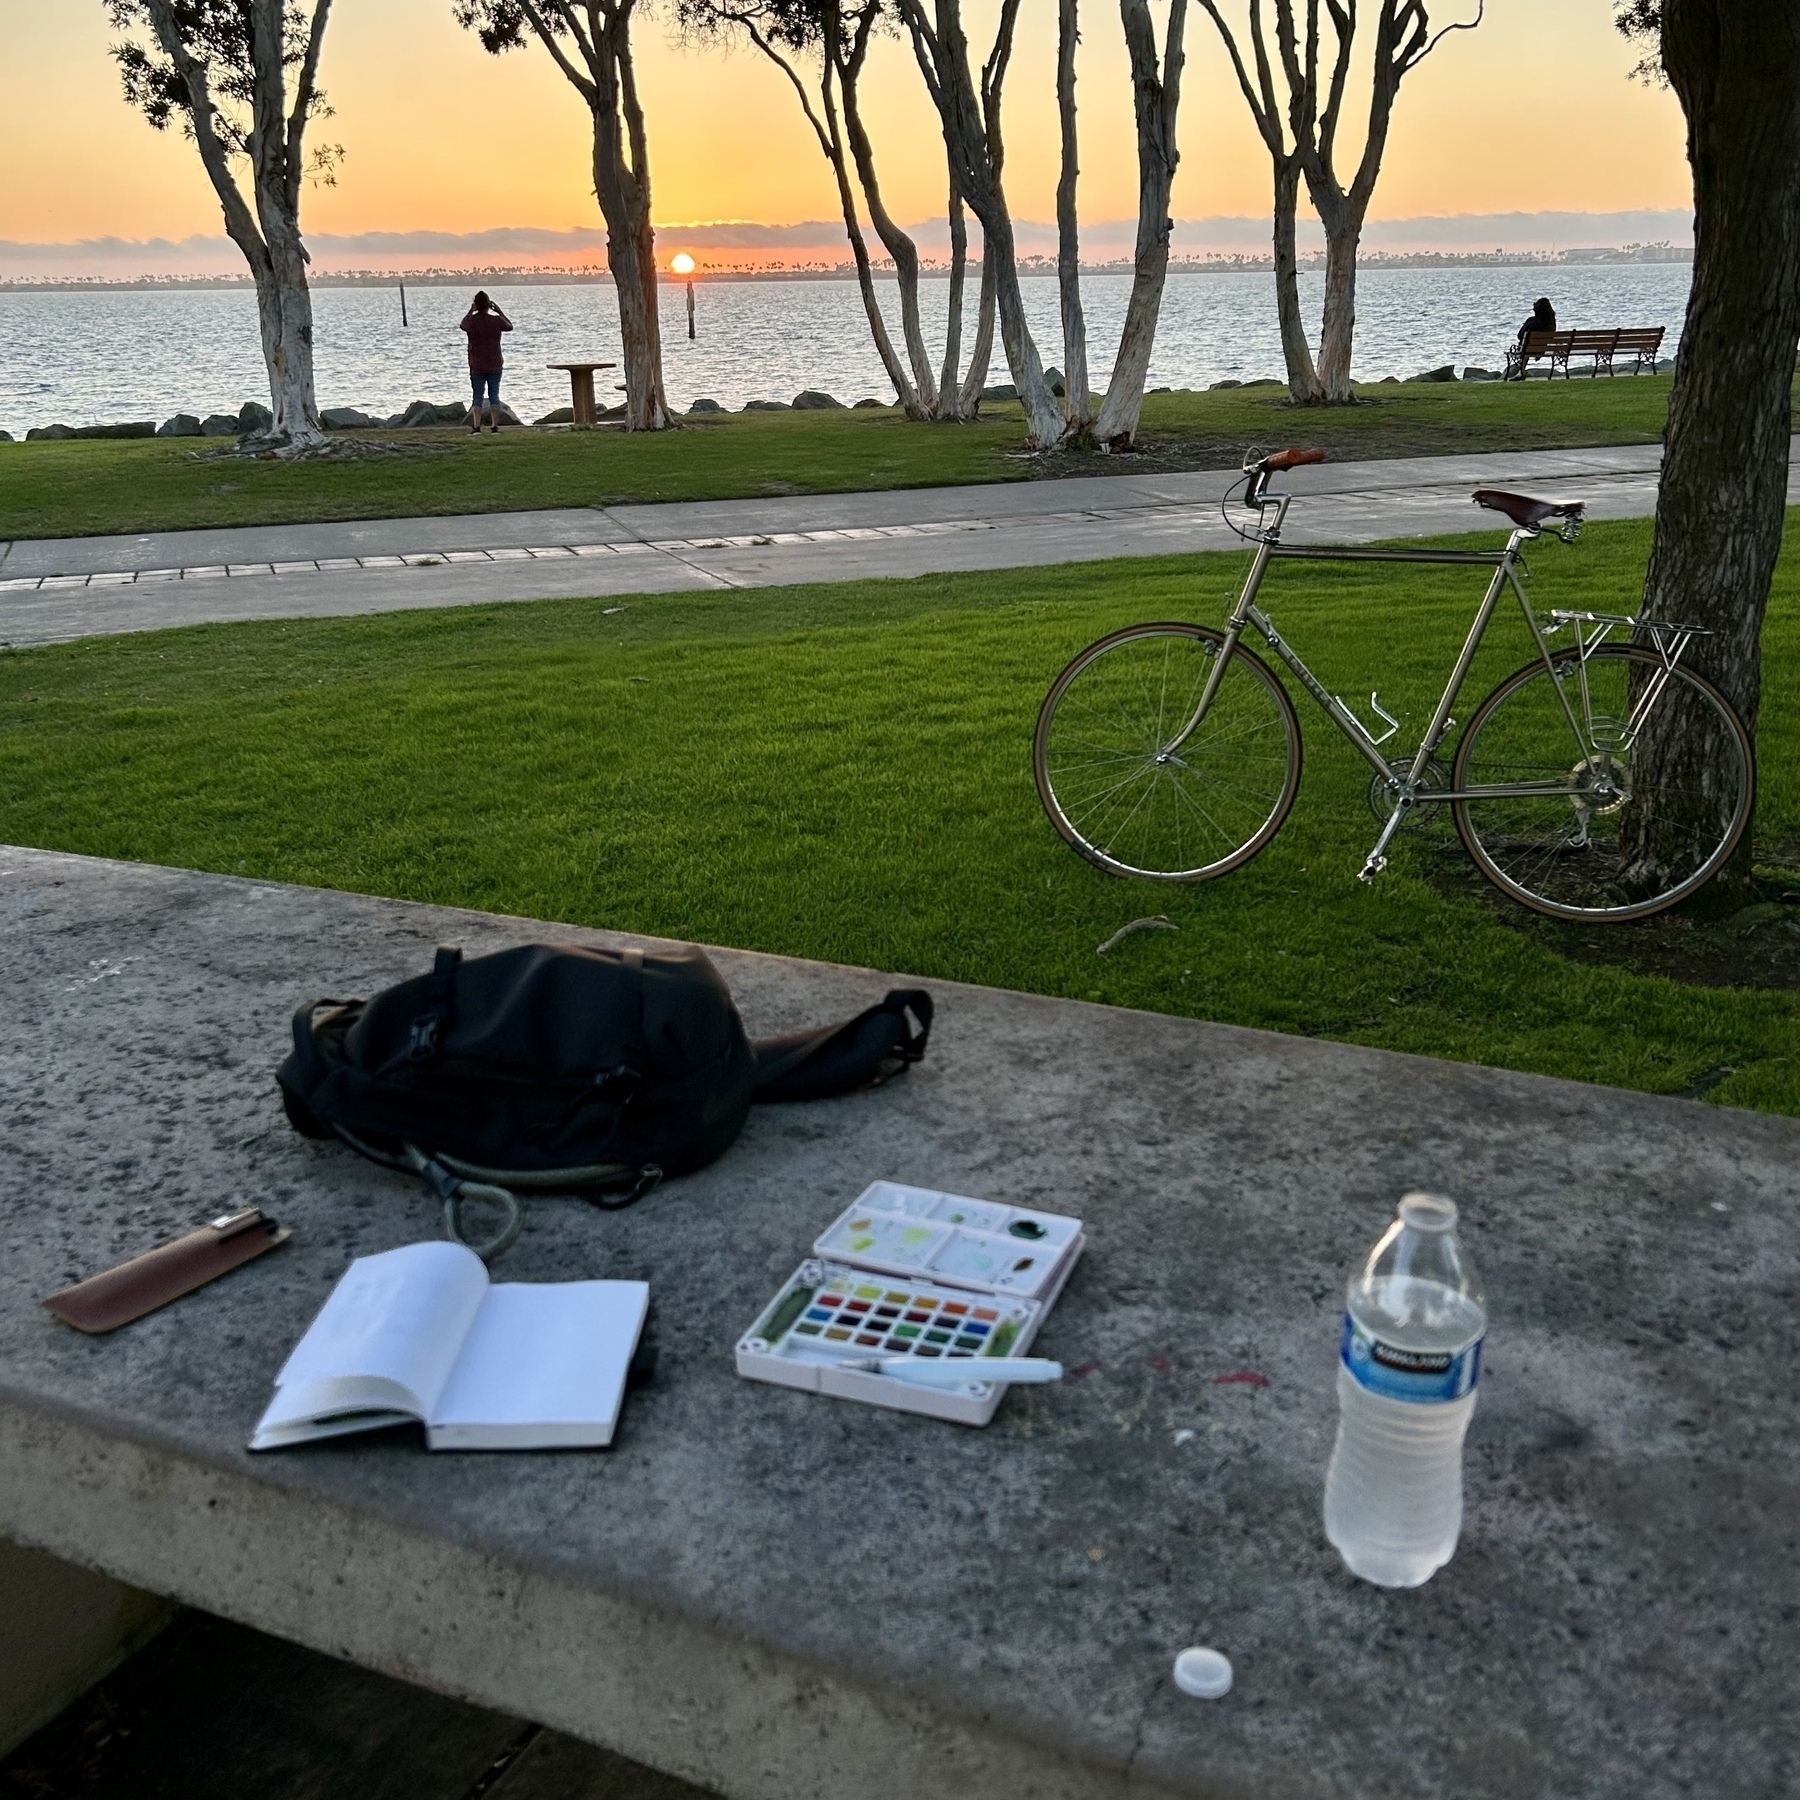 A 1982 Univega Gran Turismo bicycle stands on grass by the ocean at sunset; a backpack, pen, water bottle, and open paint set rest on a picnic table in the foreground.